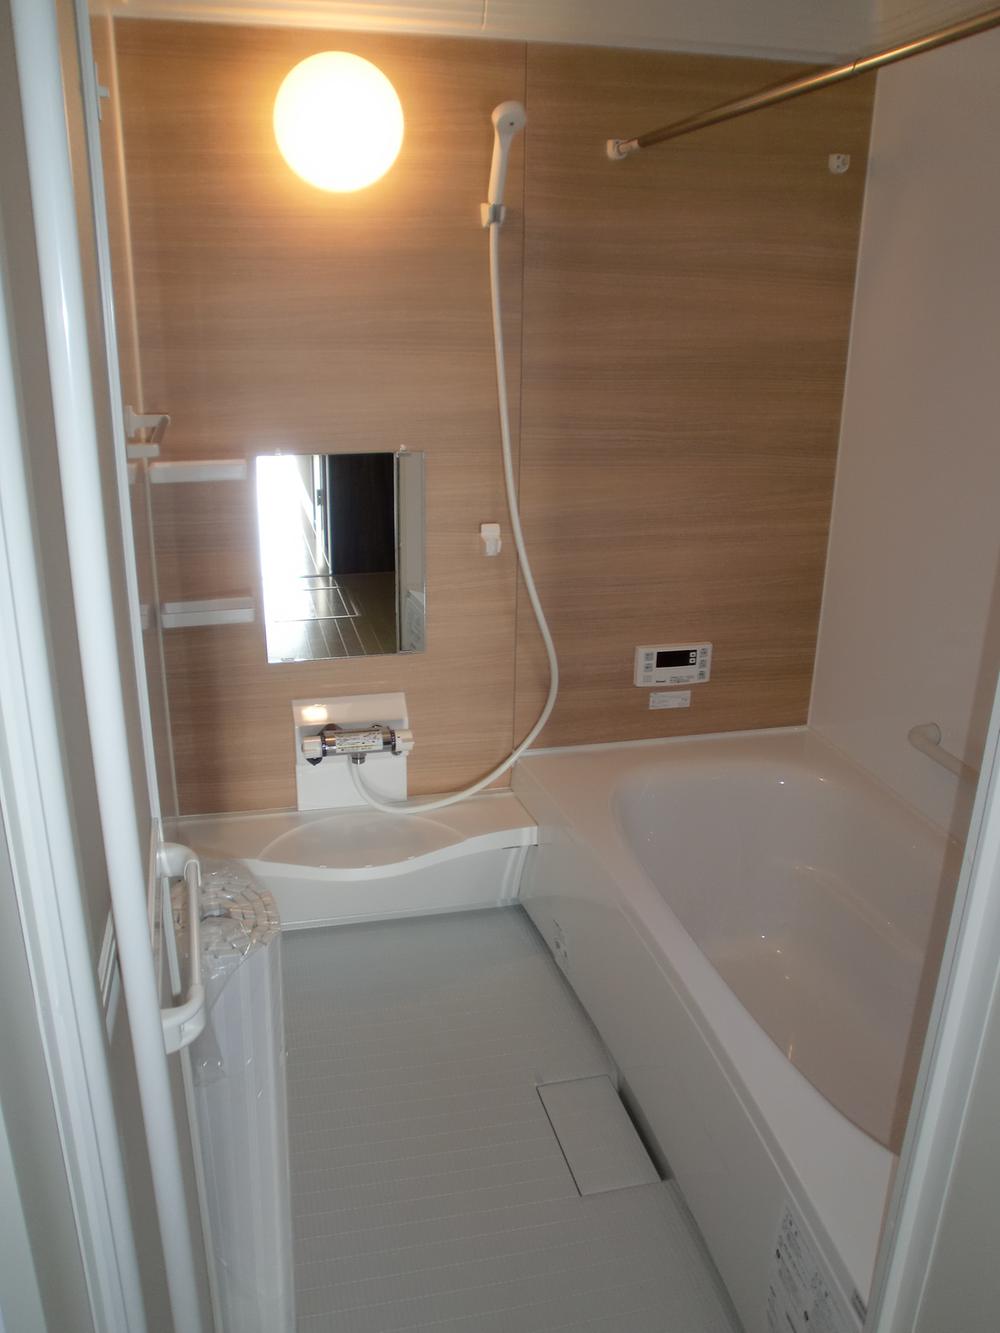 Bathroom. The best part of the new construction, Bathtub also spacious with 1 pyeong type of bathroom, Relax stretched a foot.